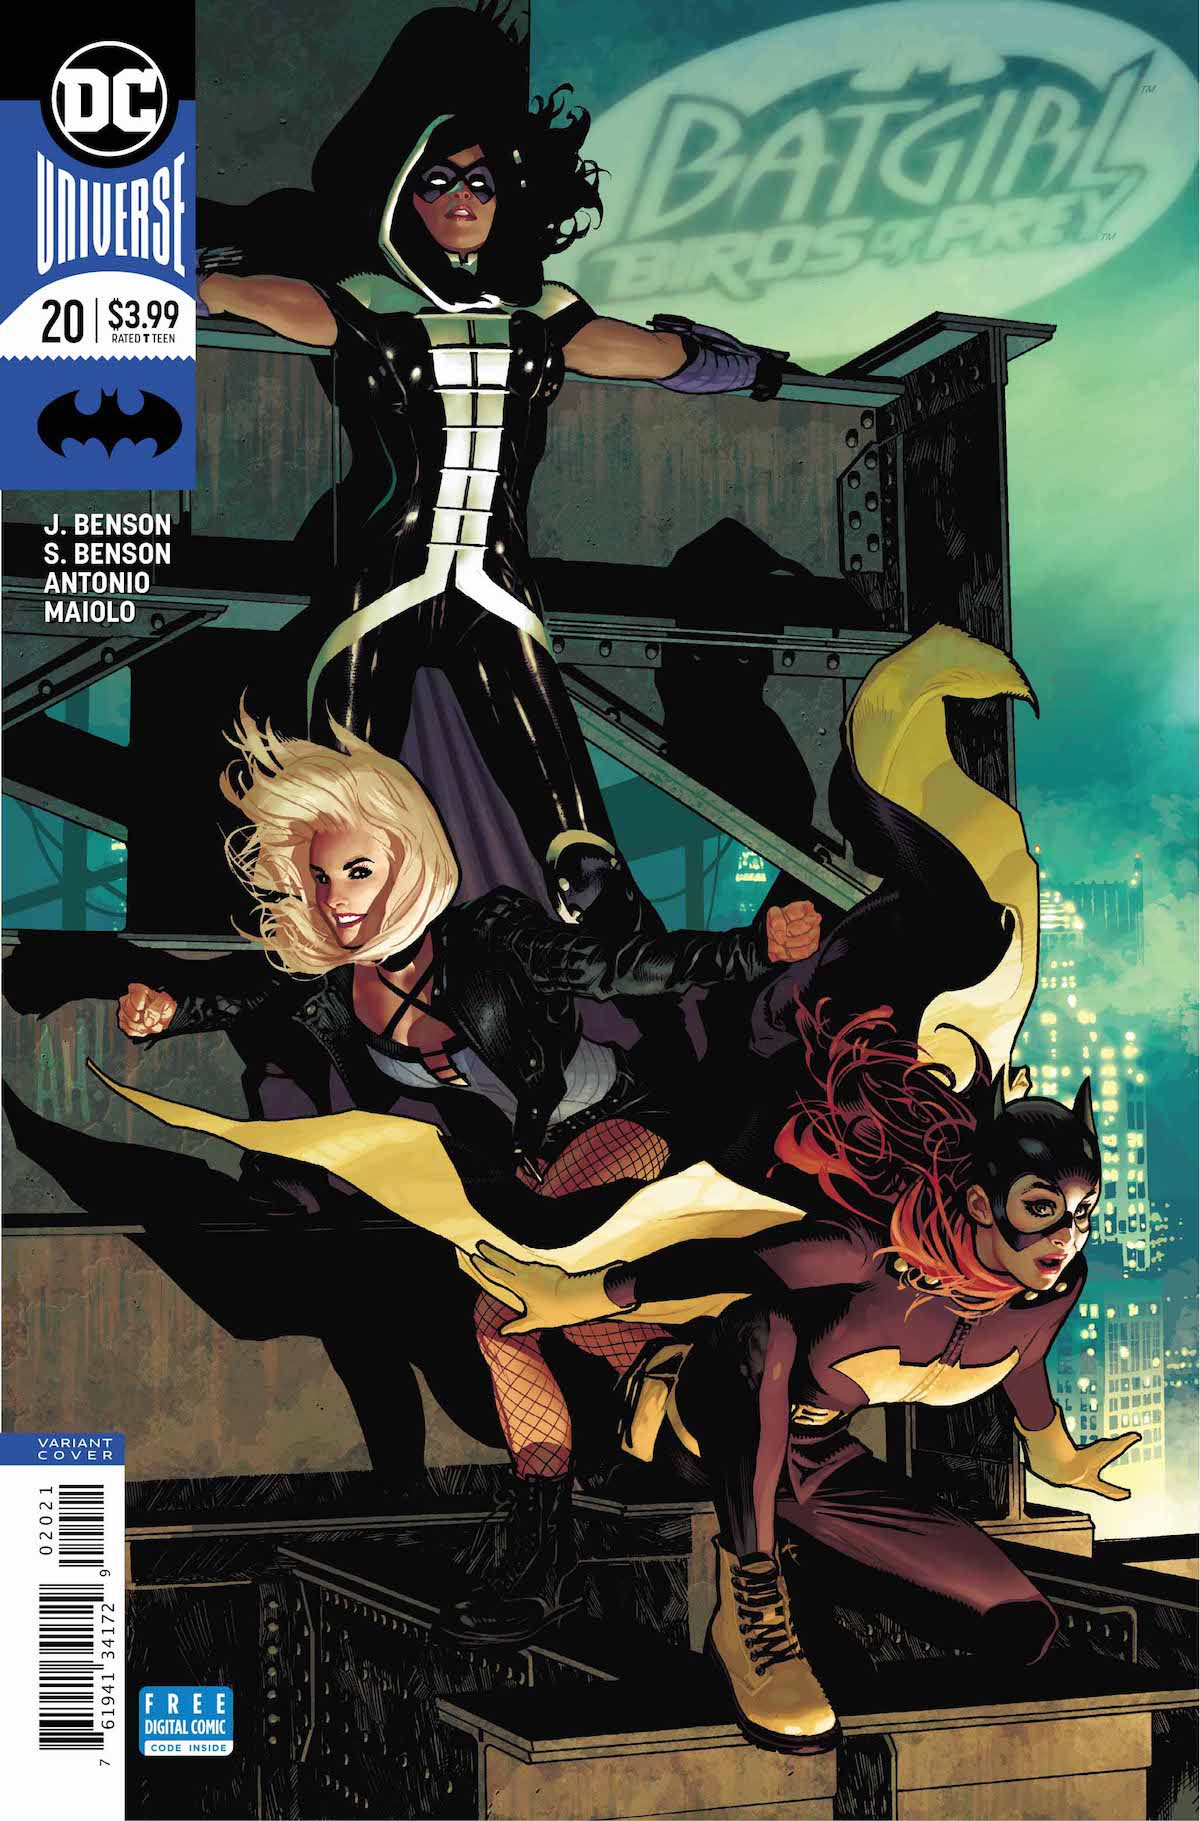 Batgirl and the Birds of Prey #20 variant cover